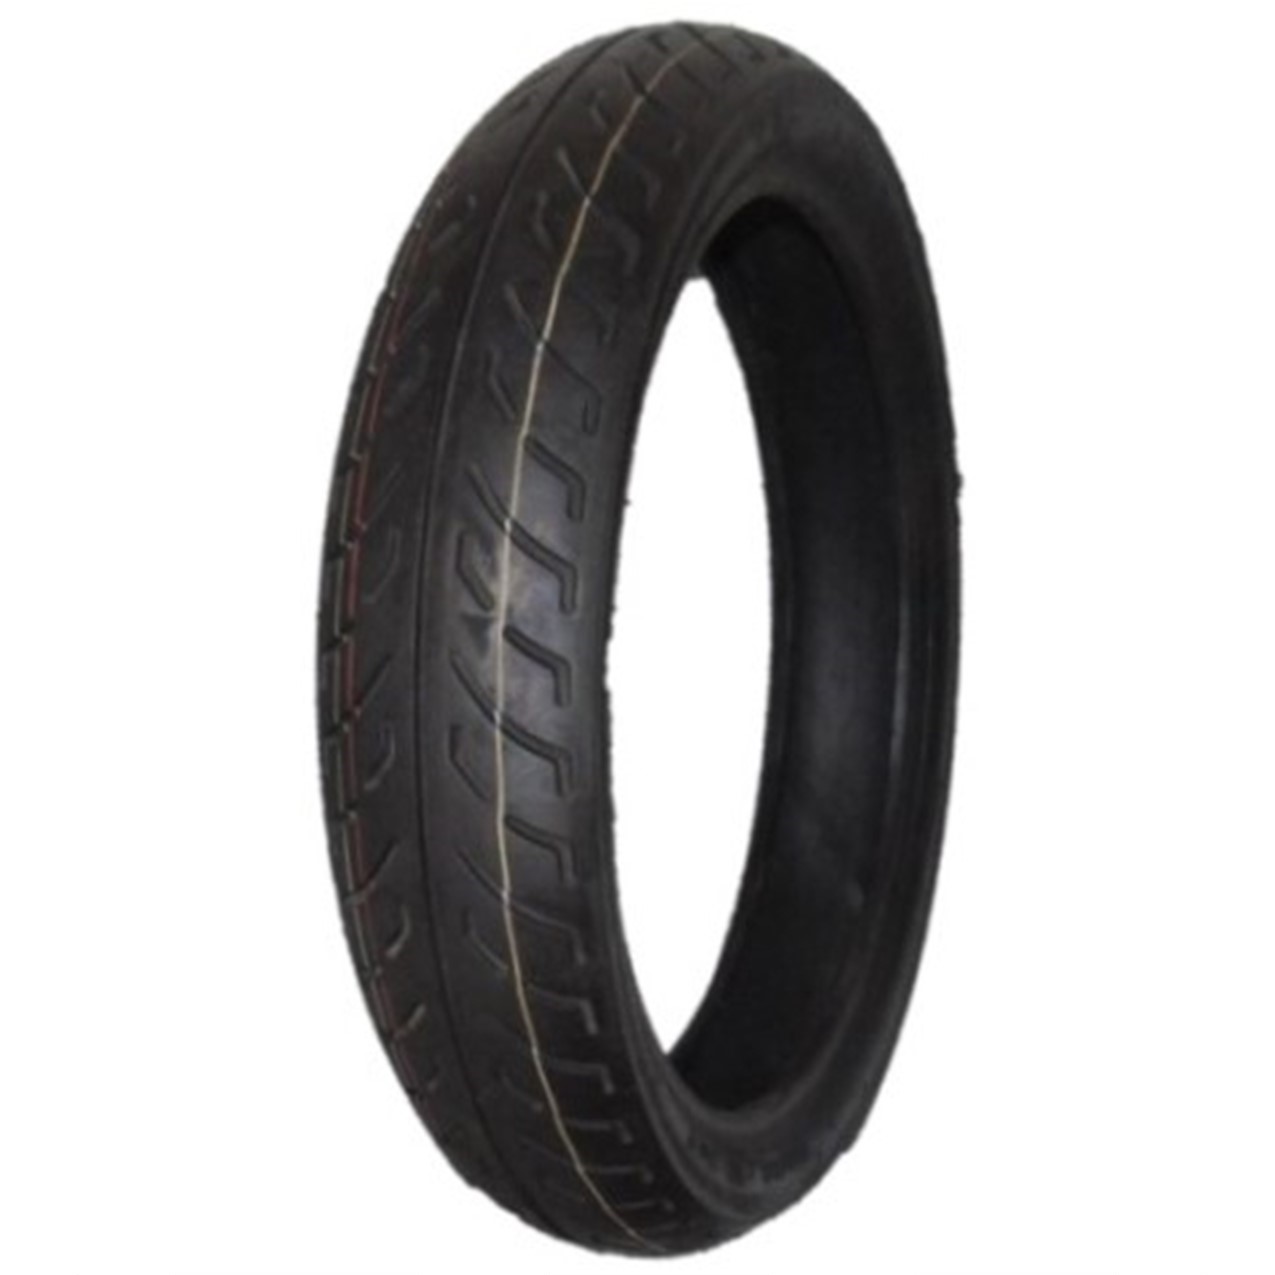 TIRE (16") 100/80-16 Vee Rubber VRM224 Moped Tire